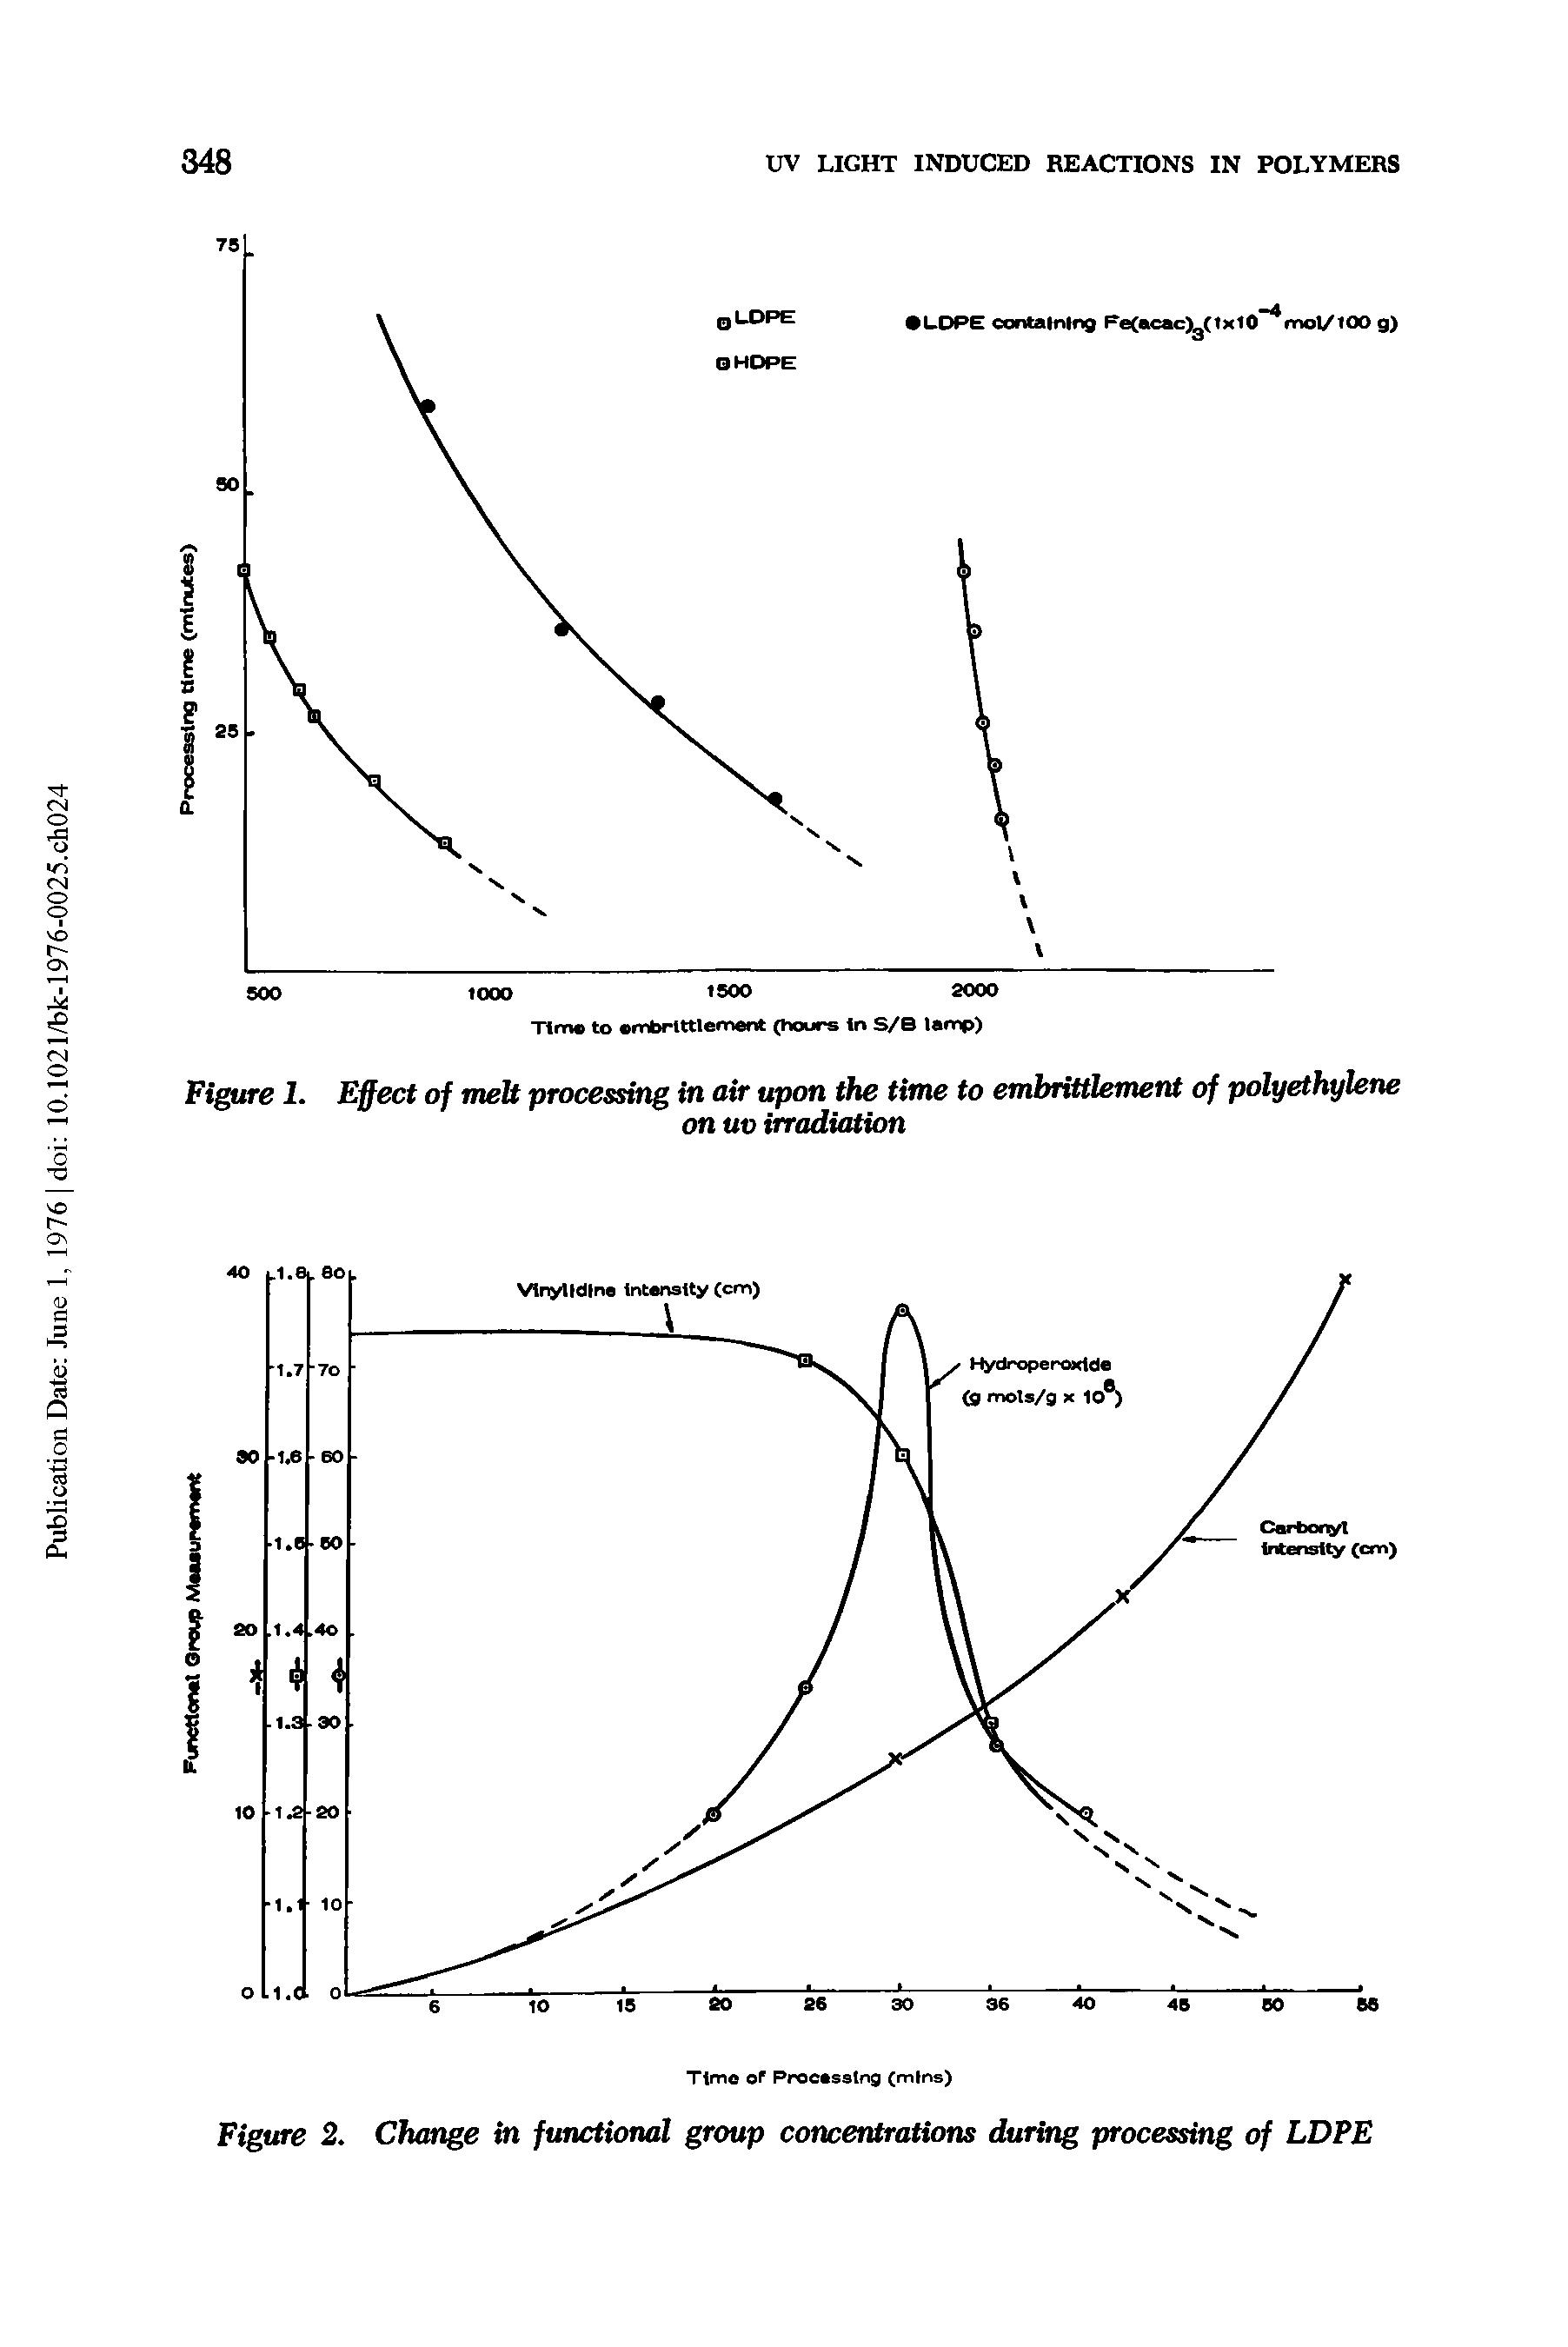 Figure 1. Effect of melt processing in air upon the time to embrittlement of polyethylene...